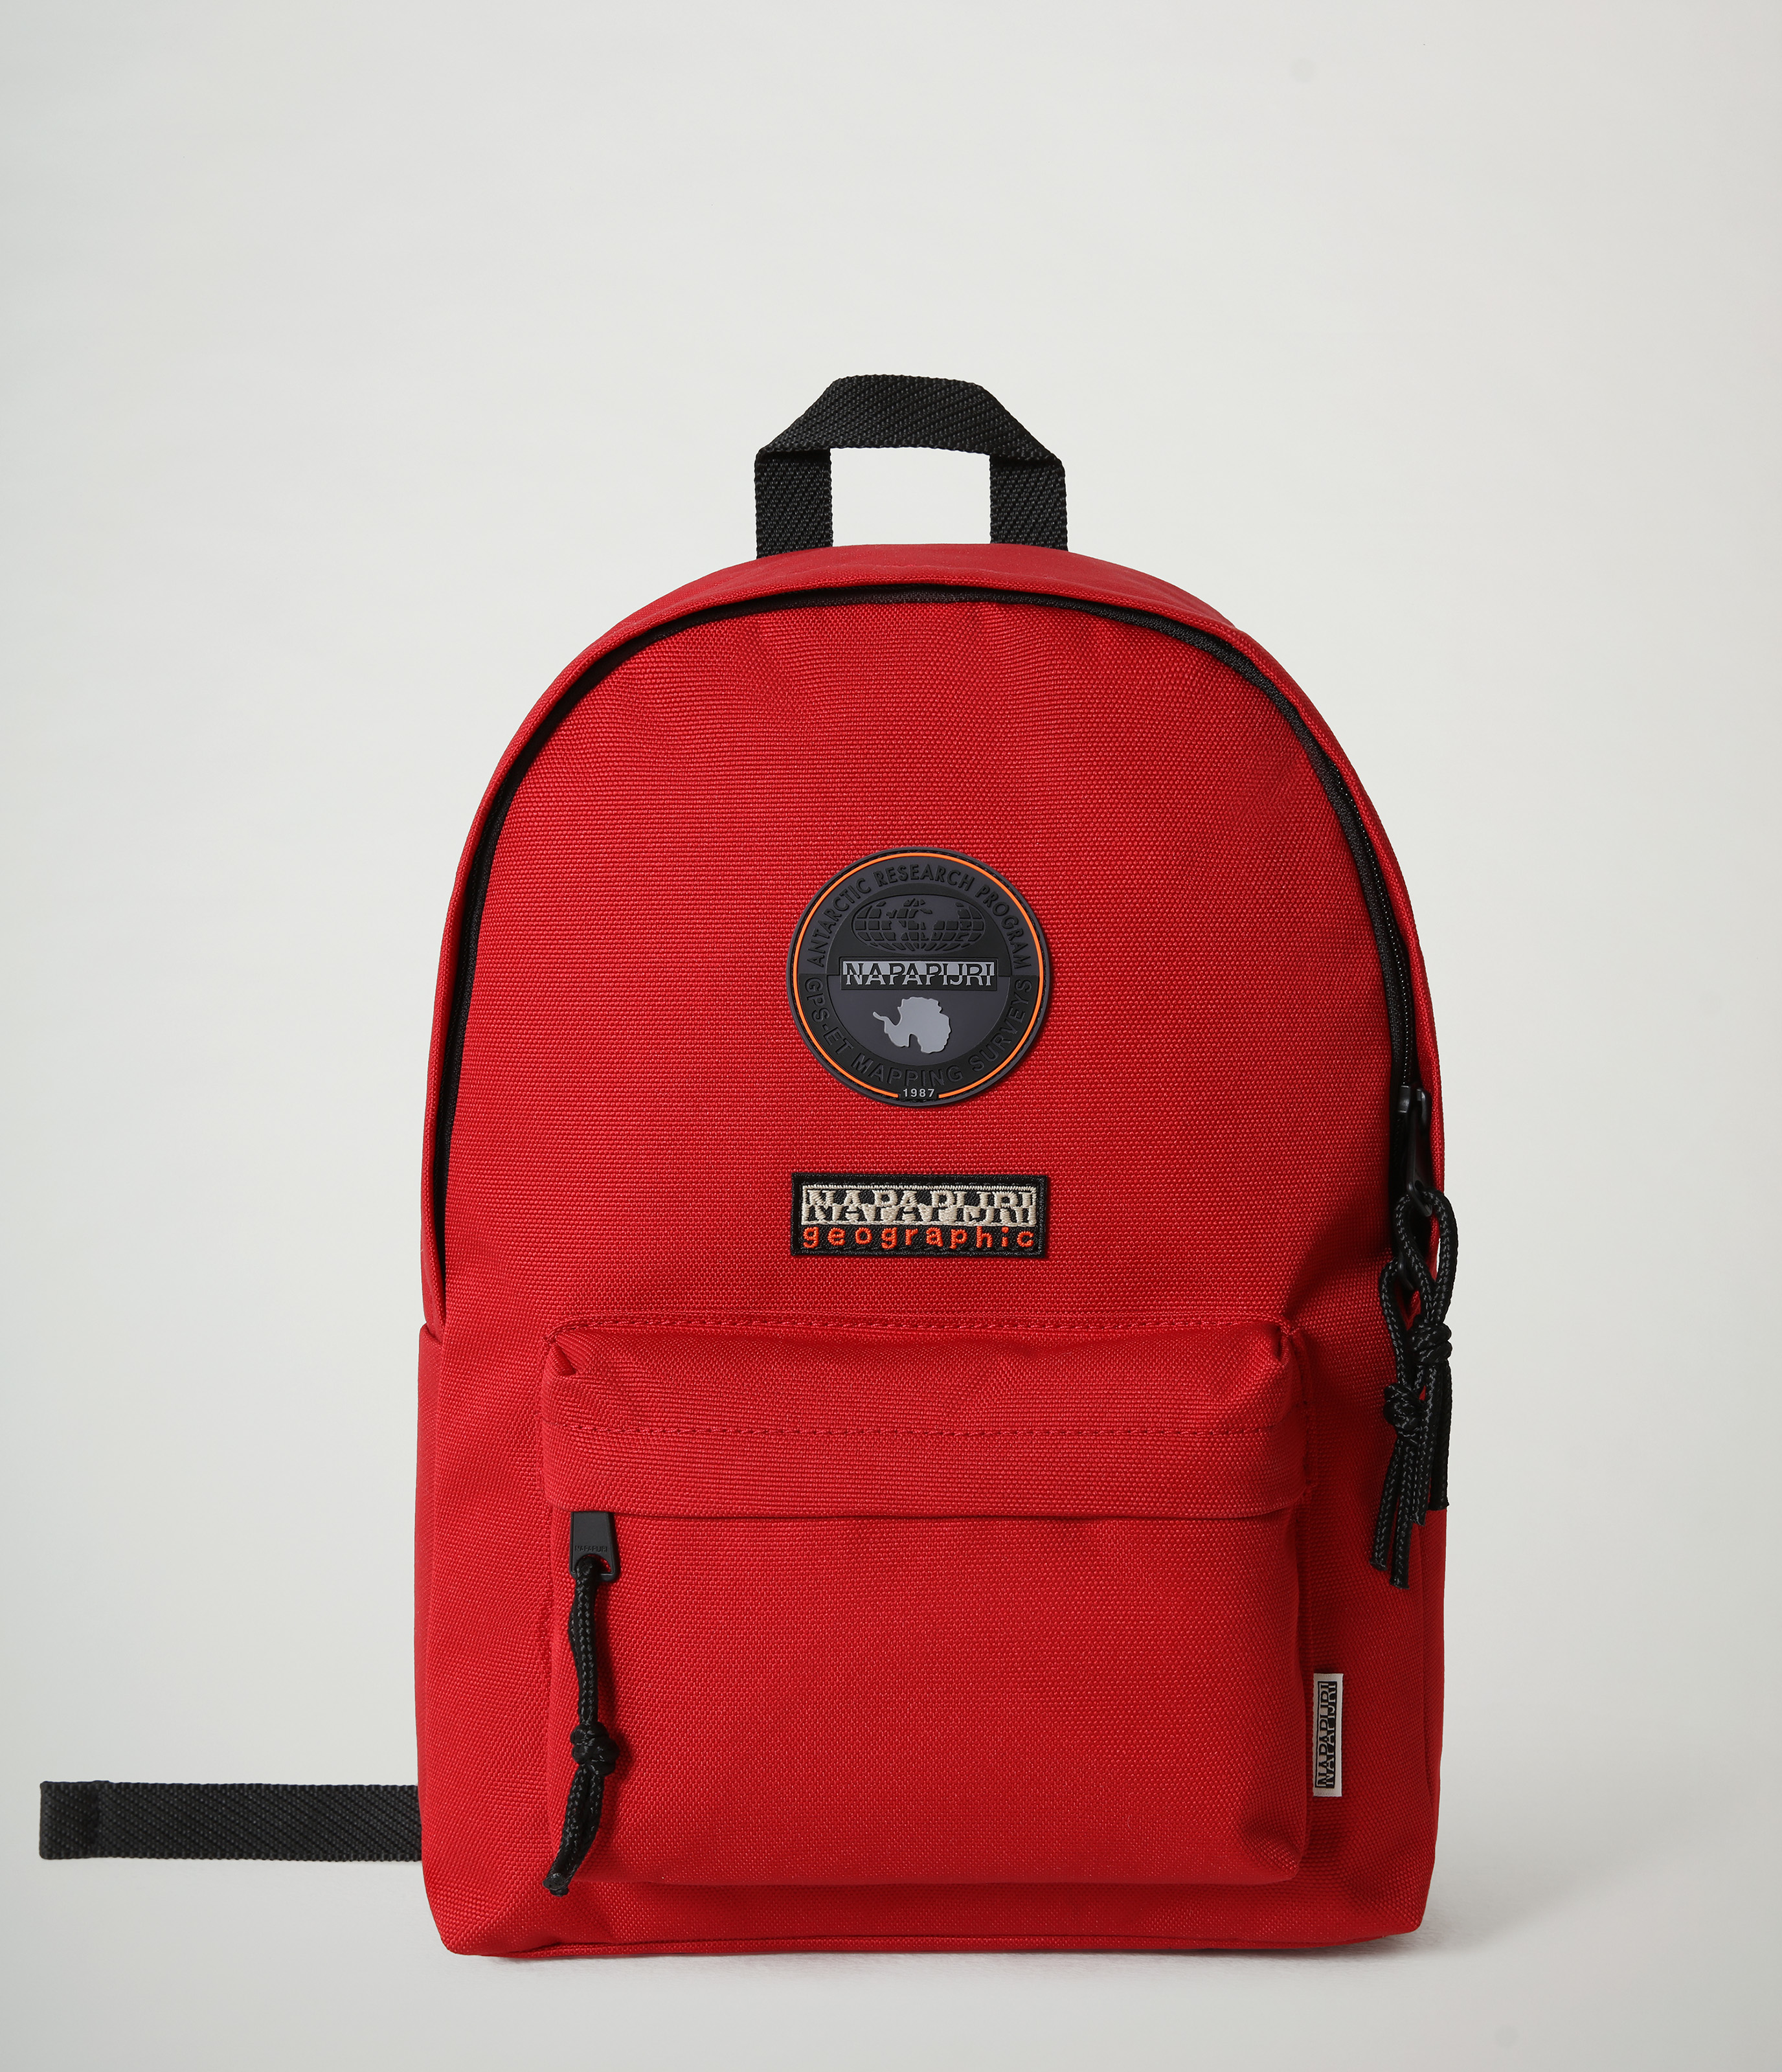 VOYAGE MINI 2 OLD RED 094 